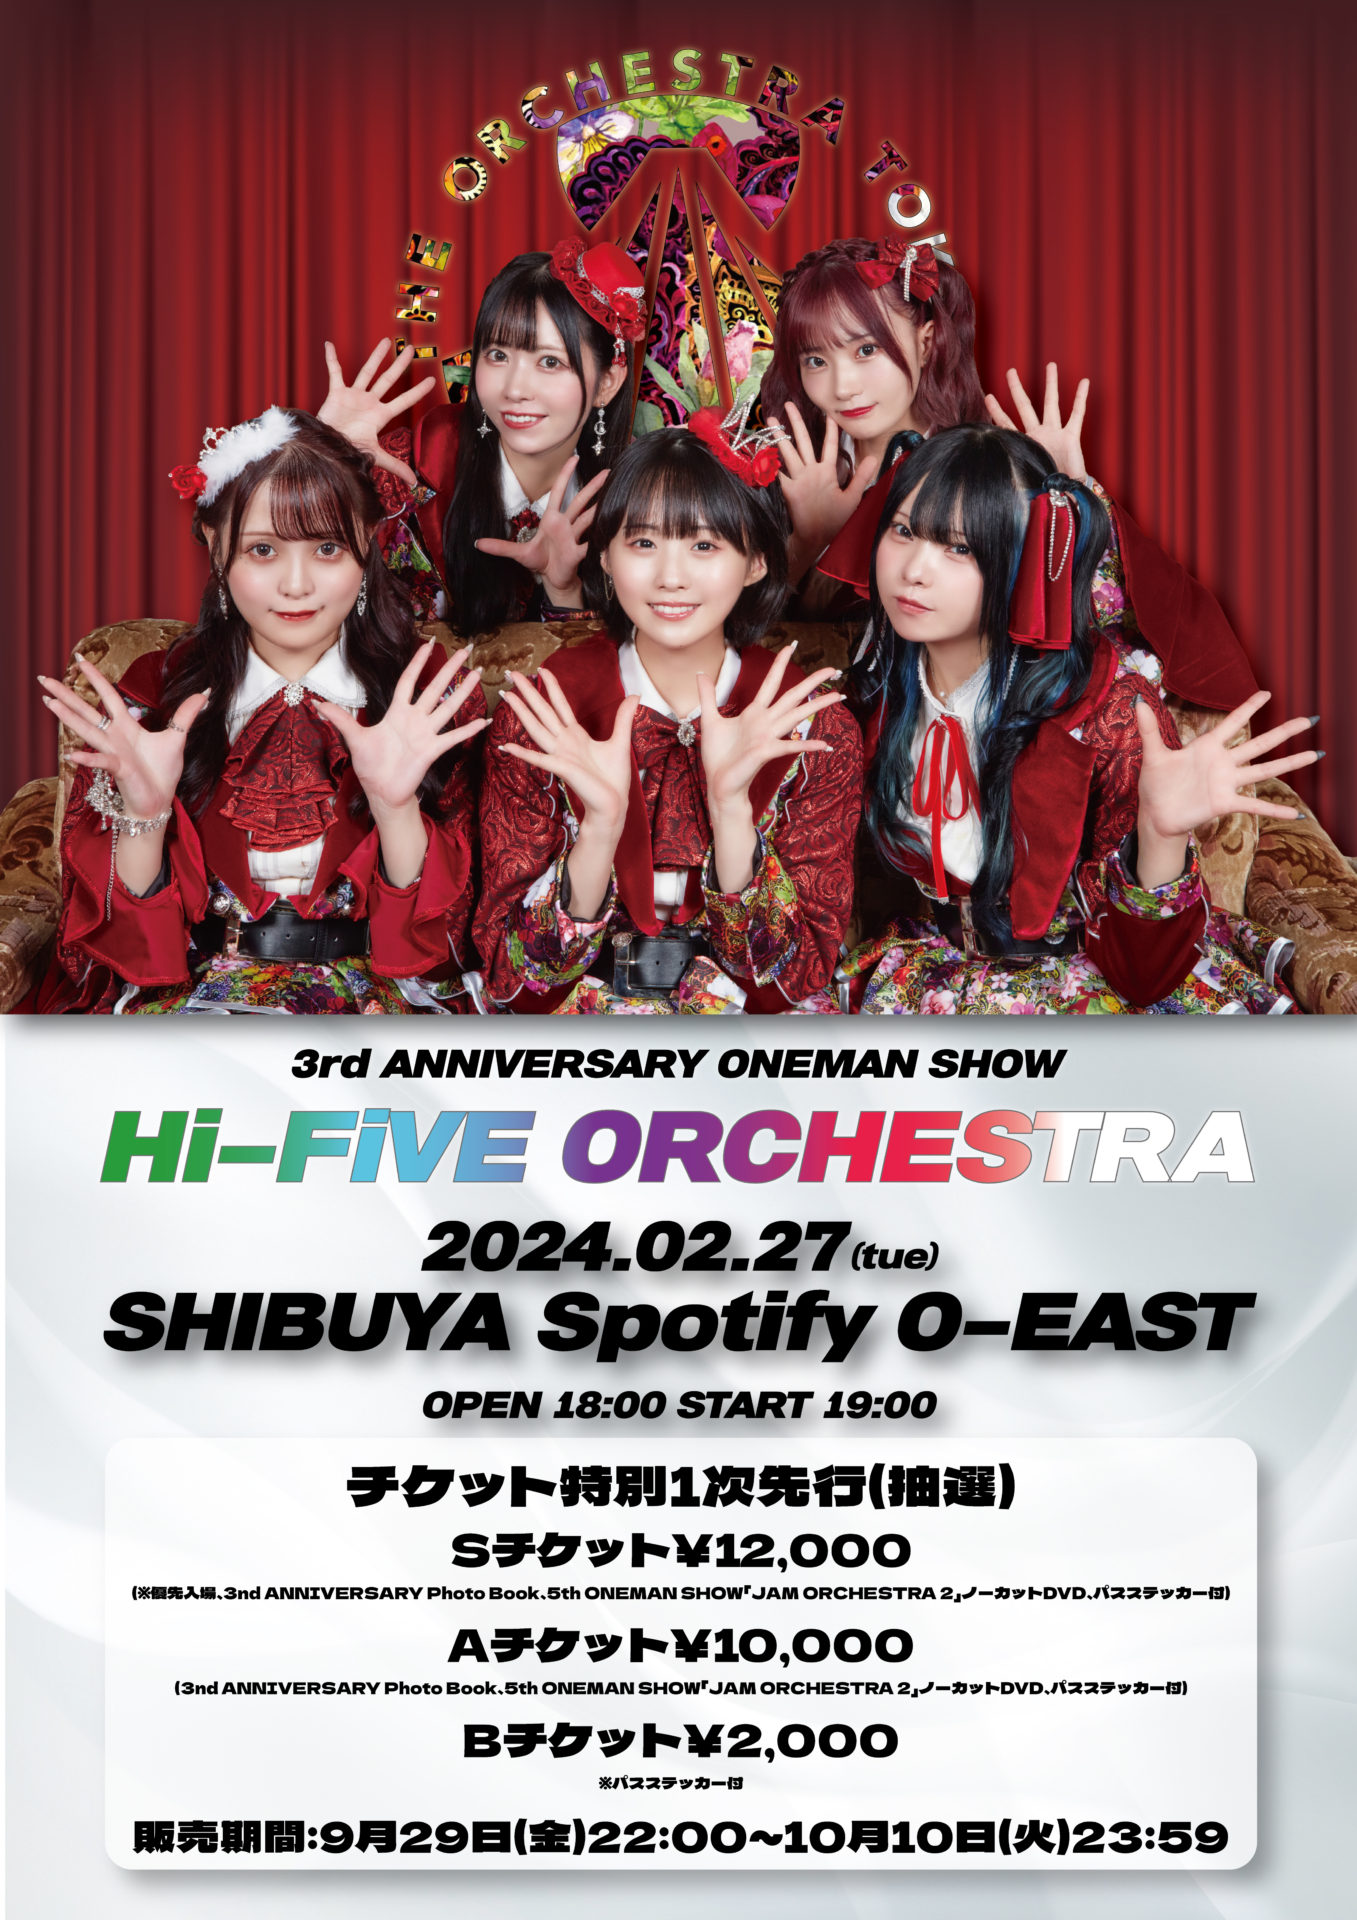 THE ORCHESTRA TOKYO 3rd ANNIVERSARY ONEMAN SHOW『Hi-FiVE ORCHESTRA 